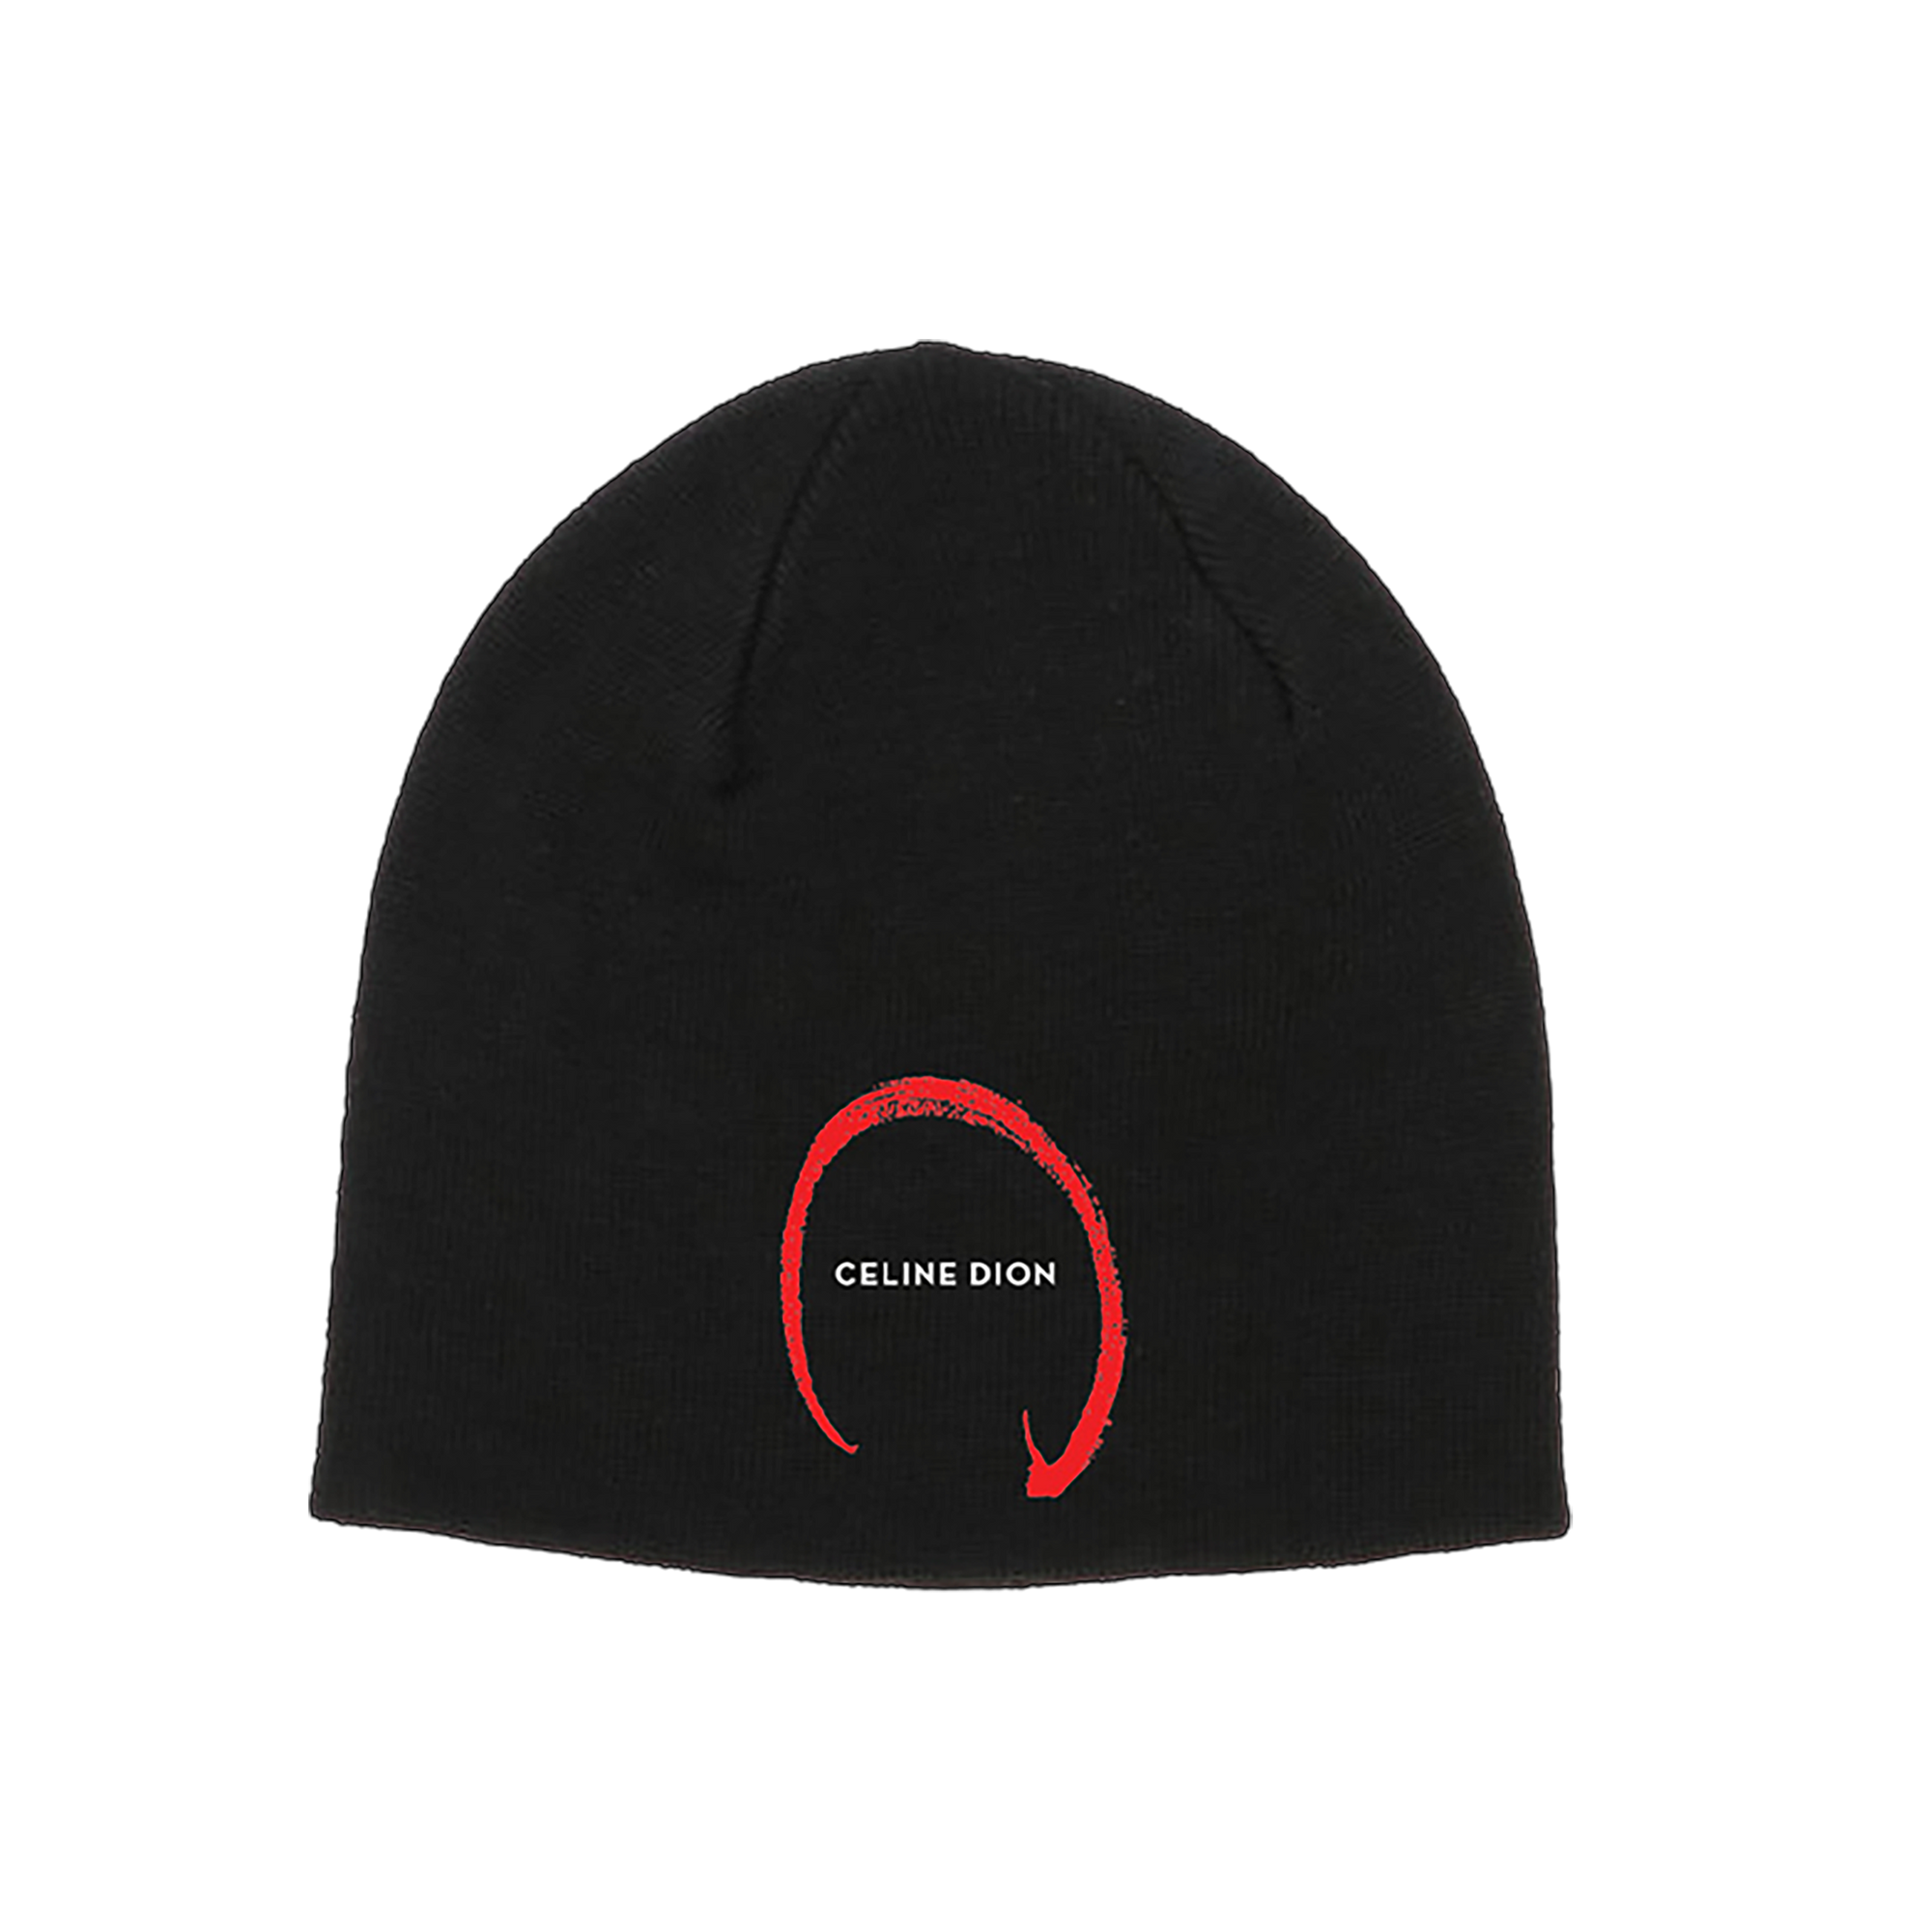 black beanie with classic Celine Dion Logo embroidered plus red C accent 